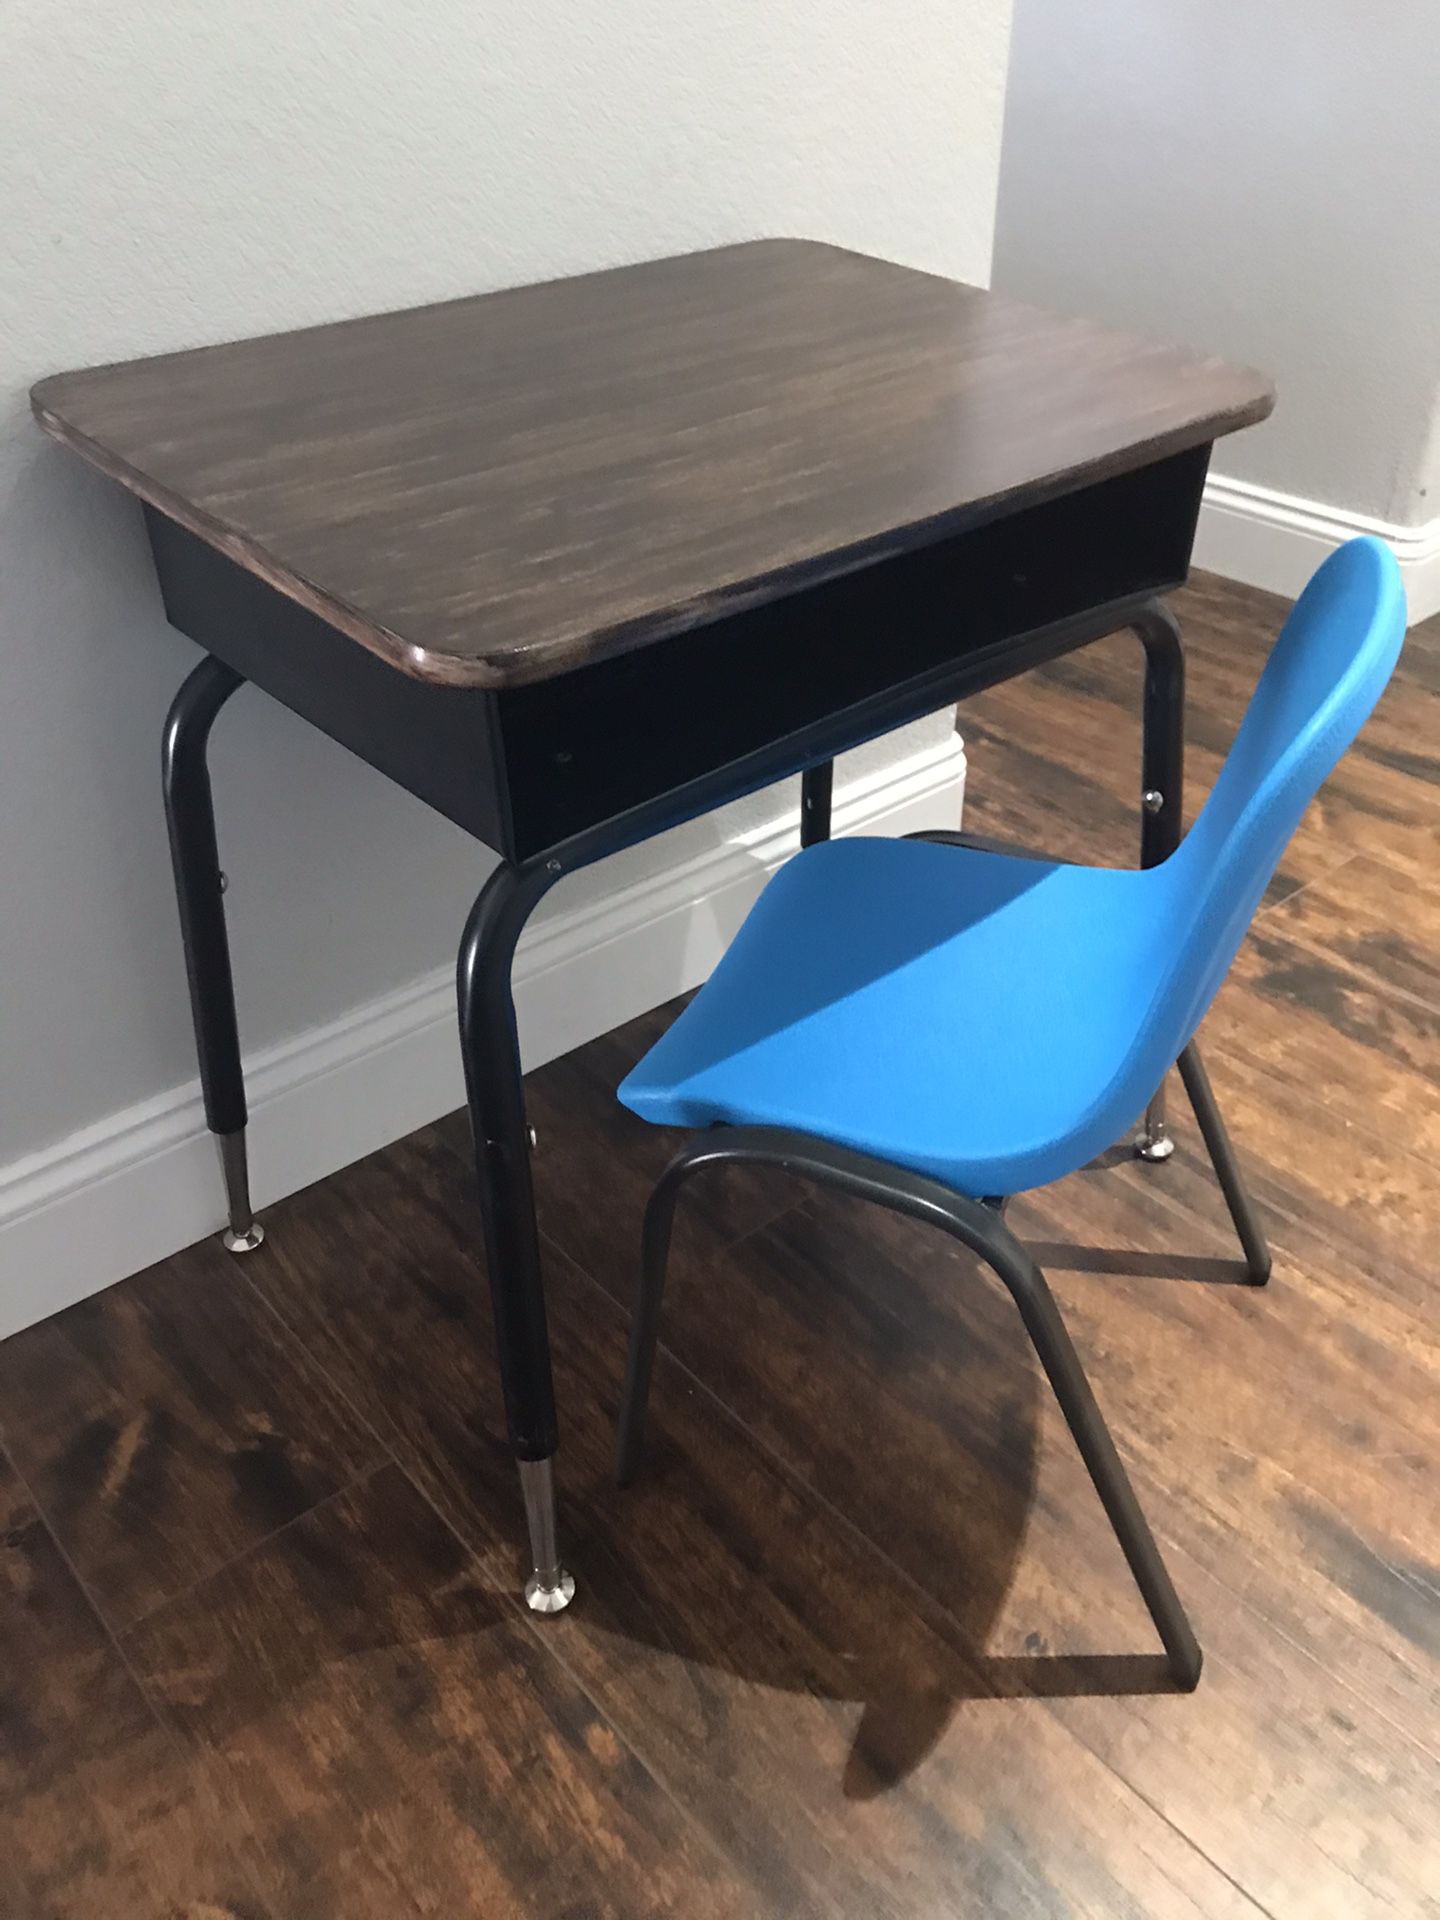 Desk and chair for kids ( with drawer ) chair is brand new